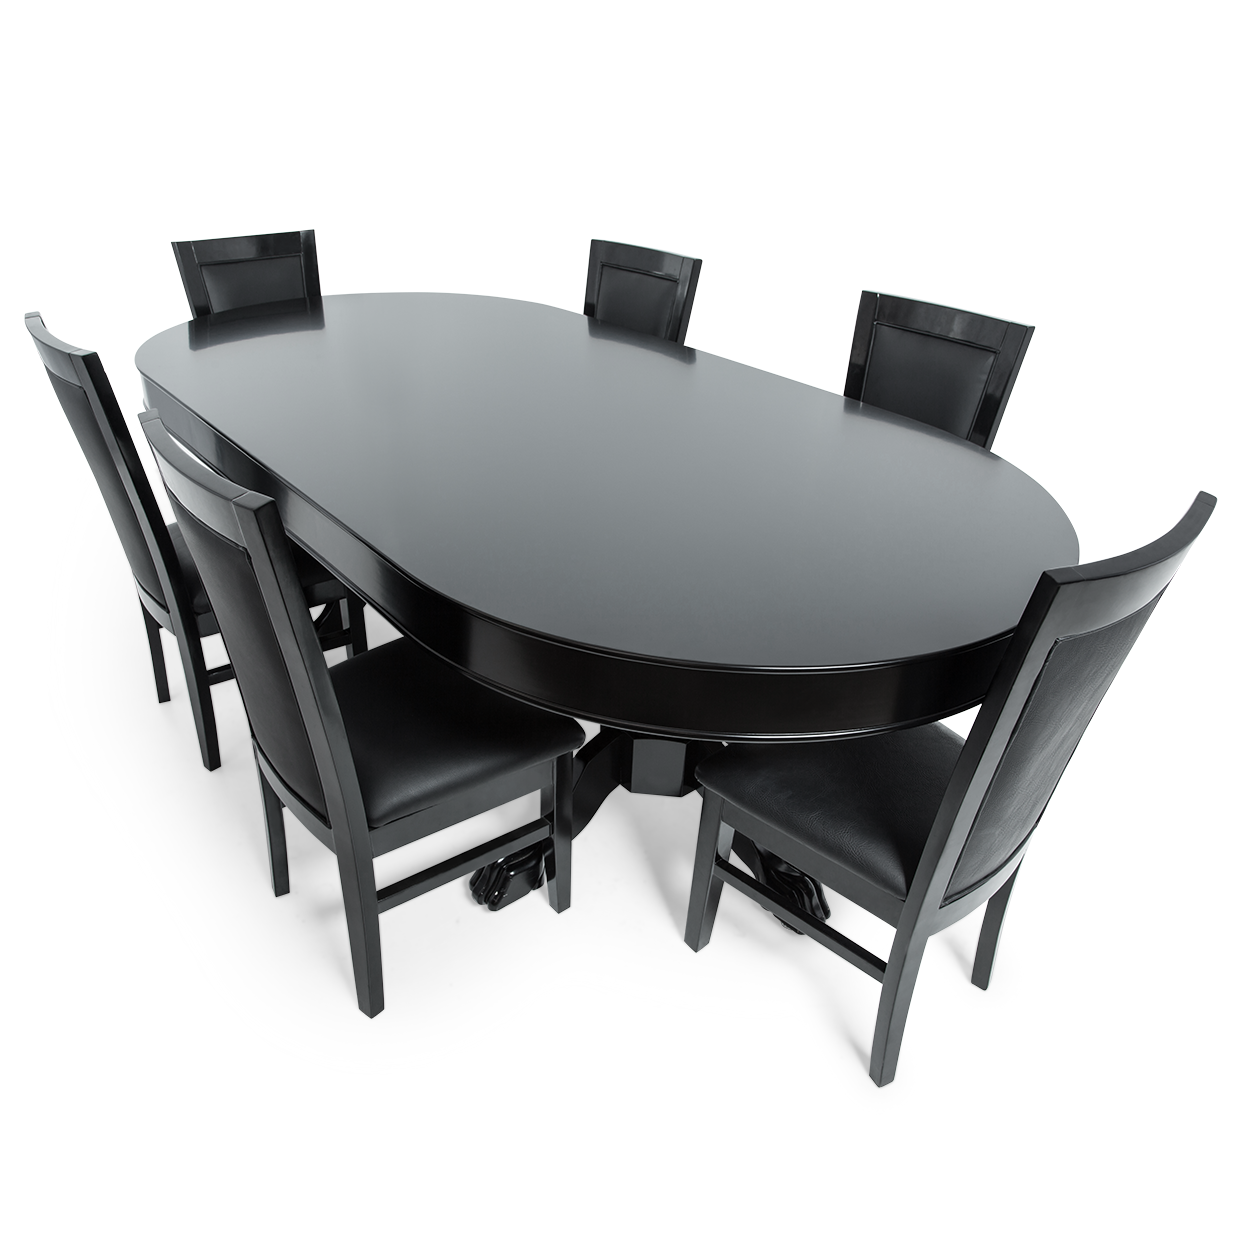 Elite game table with dining top and dining chairs.